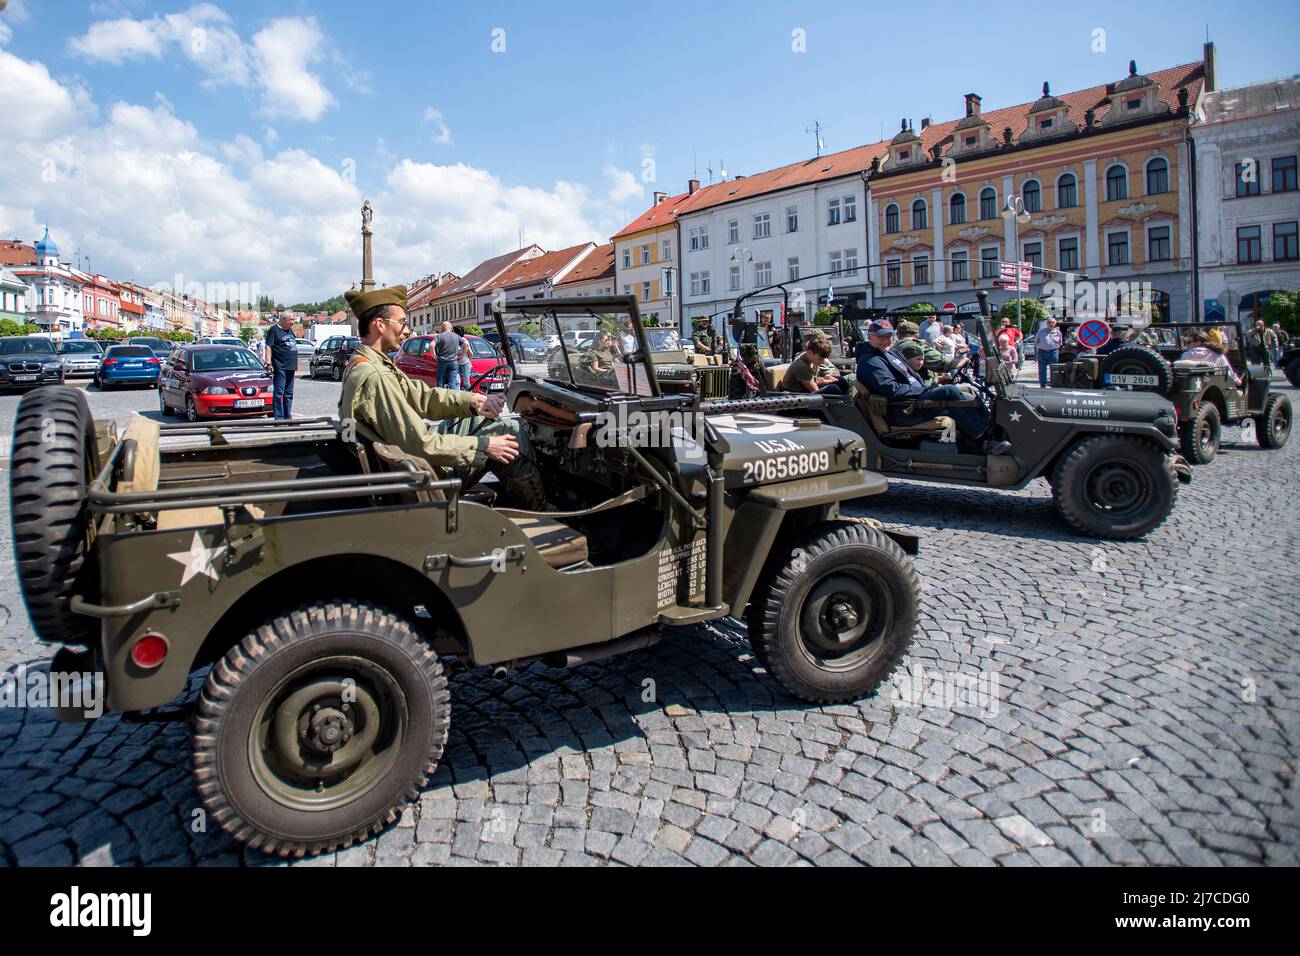 The convoy of American historical vehicles arrived in Horice, Czech Republic, on May 8, 2022. From there it continued to the Lazna Velichovky area, where there is a monument to the US army. The event commemorated the 77th anniversary of the end of World War II in Europe. (CTK Photo/David Tanecek) Stock Photo